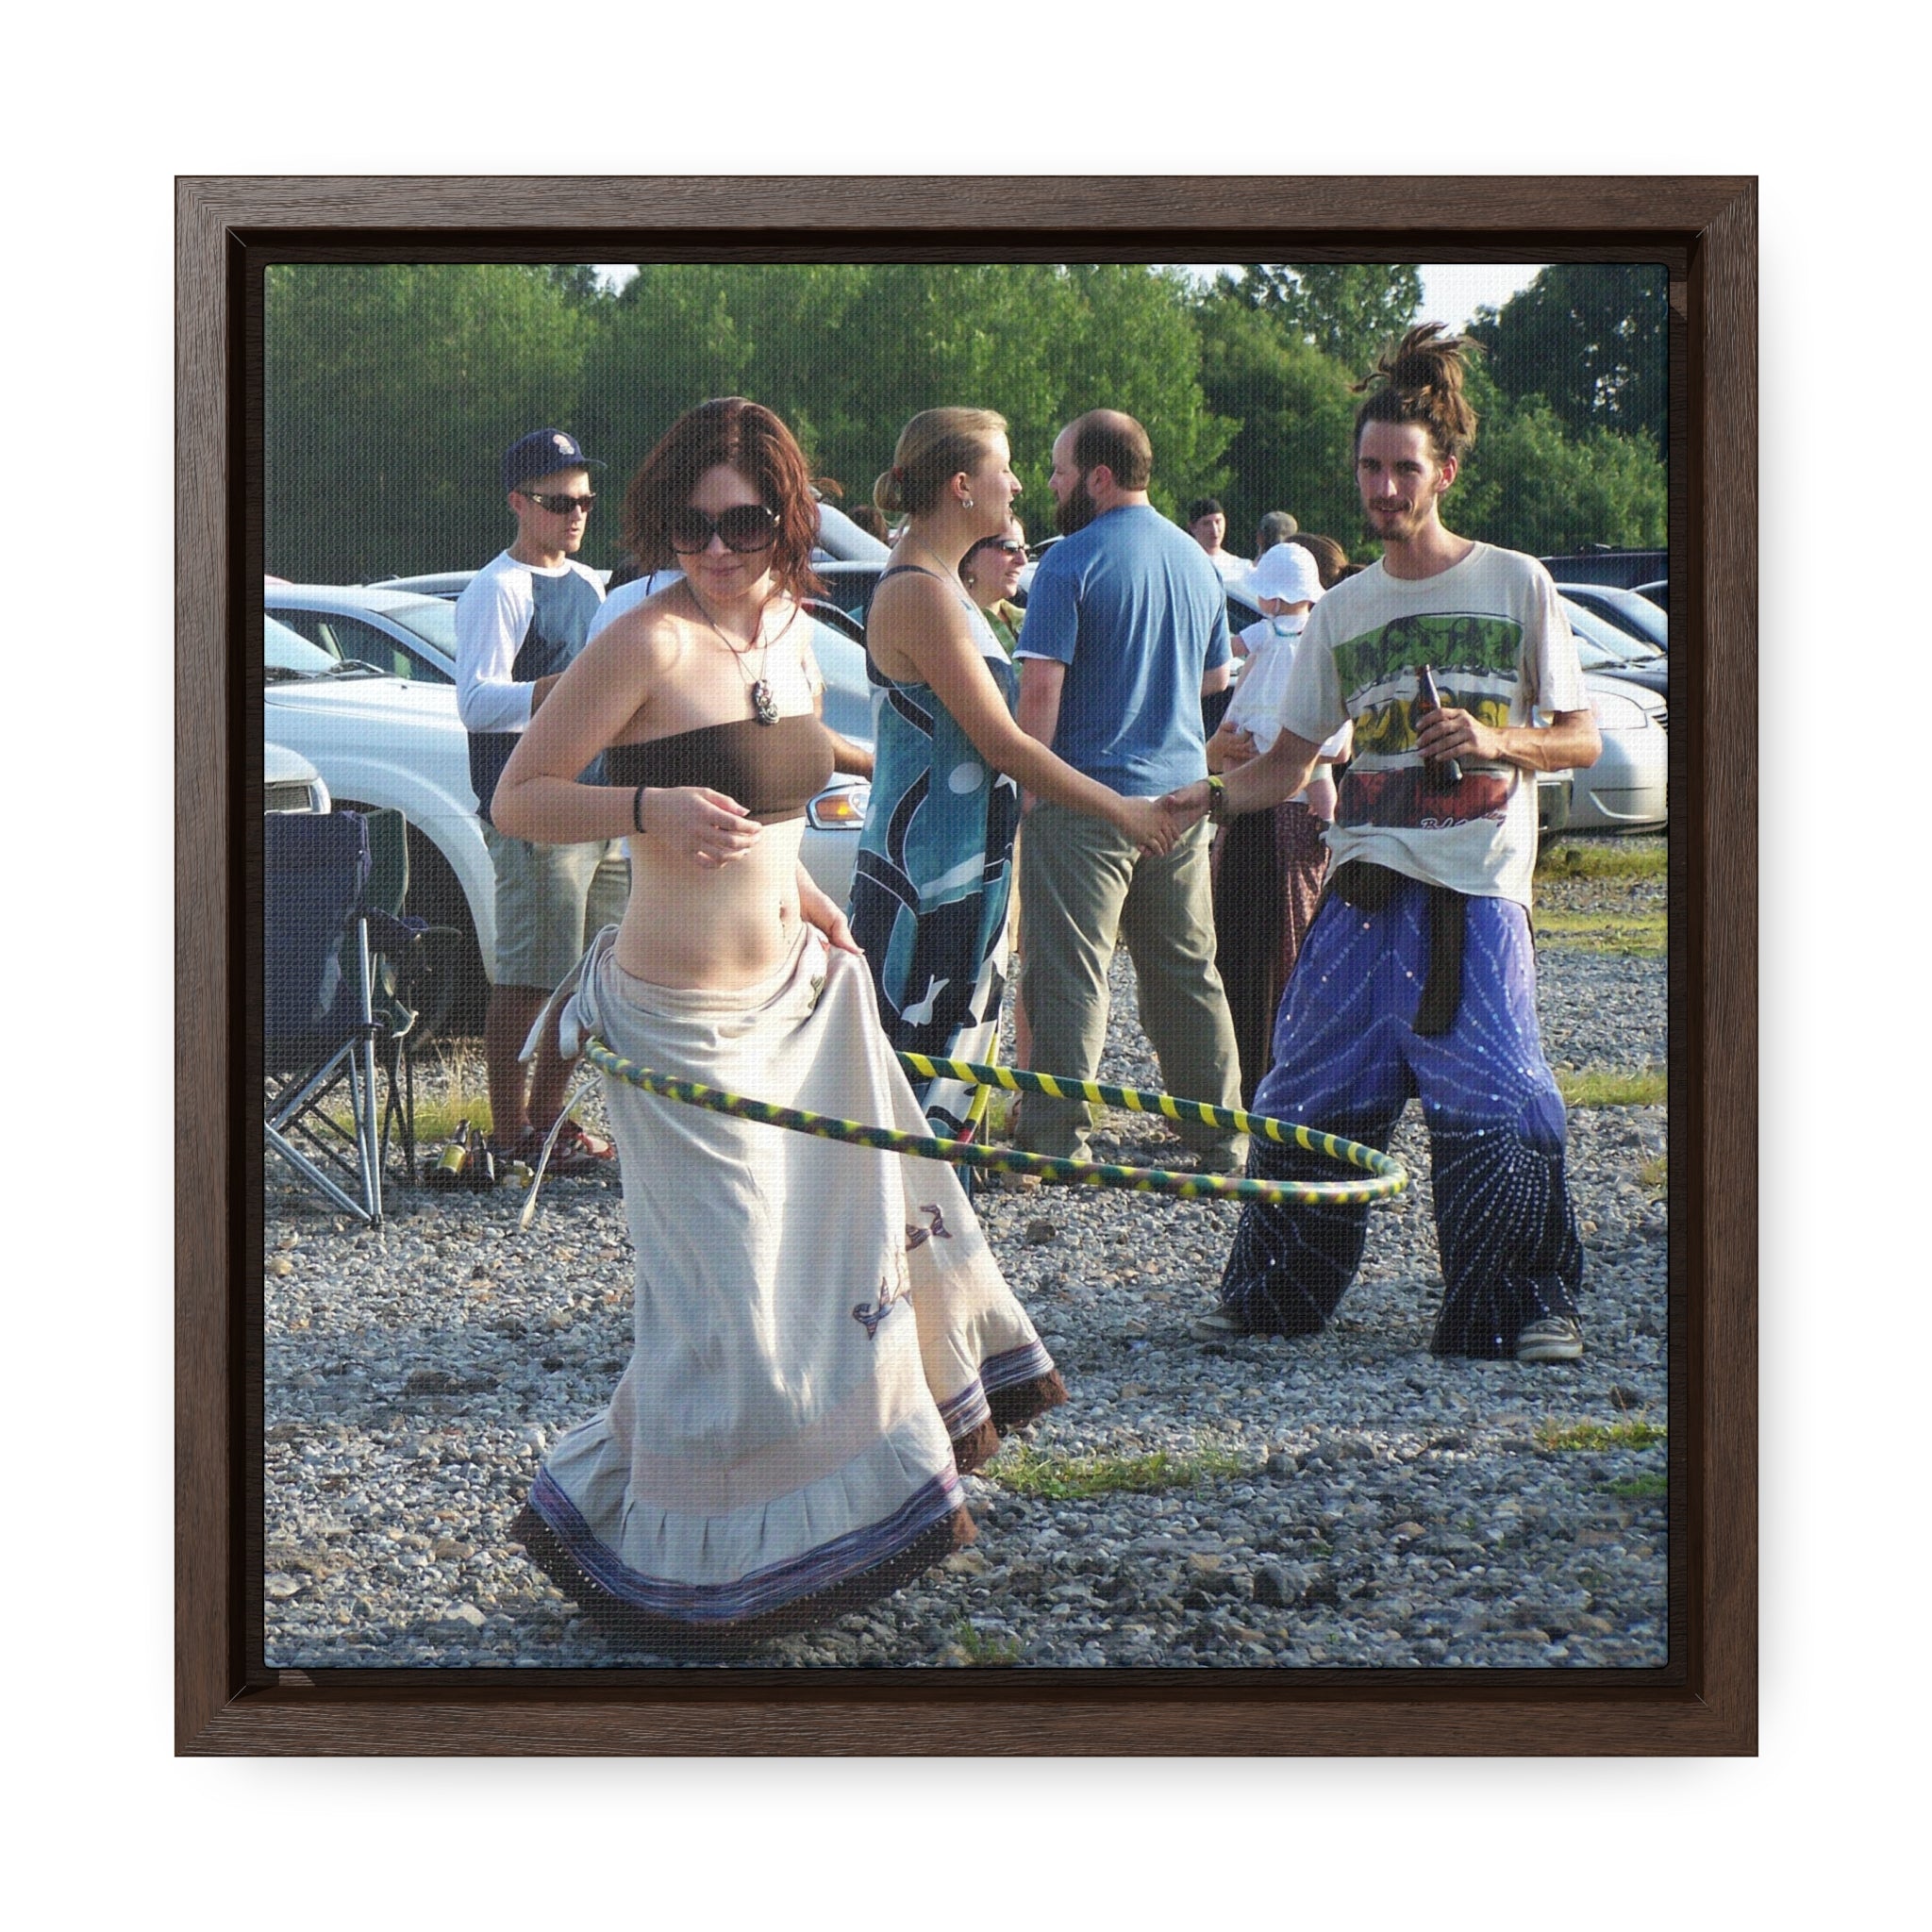 Hula Dancer in the Lot - Gallery Canvas Wraps, Square Frame